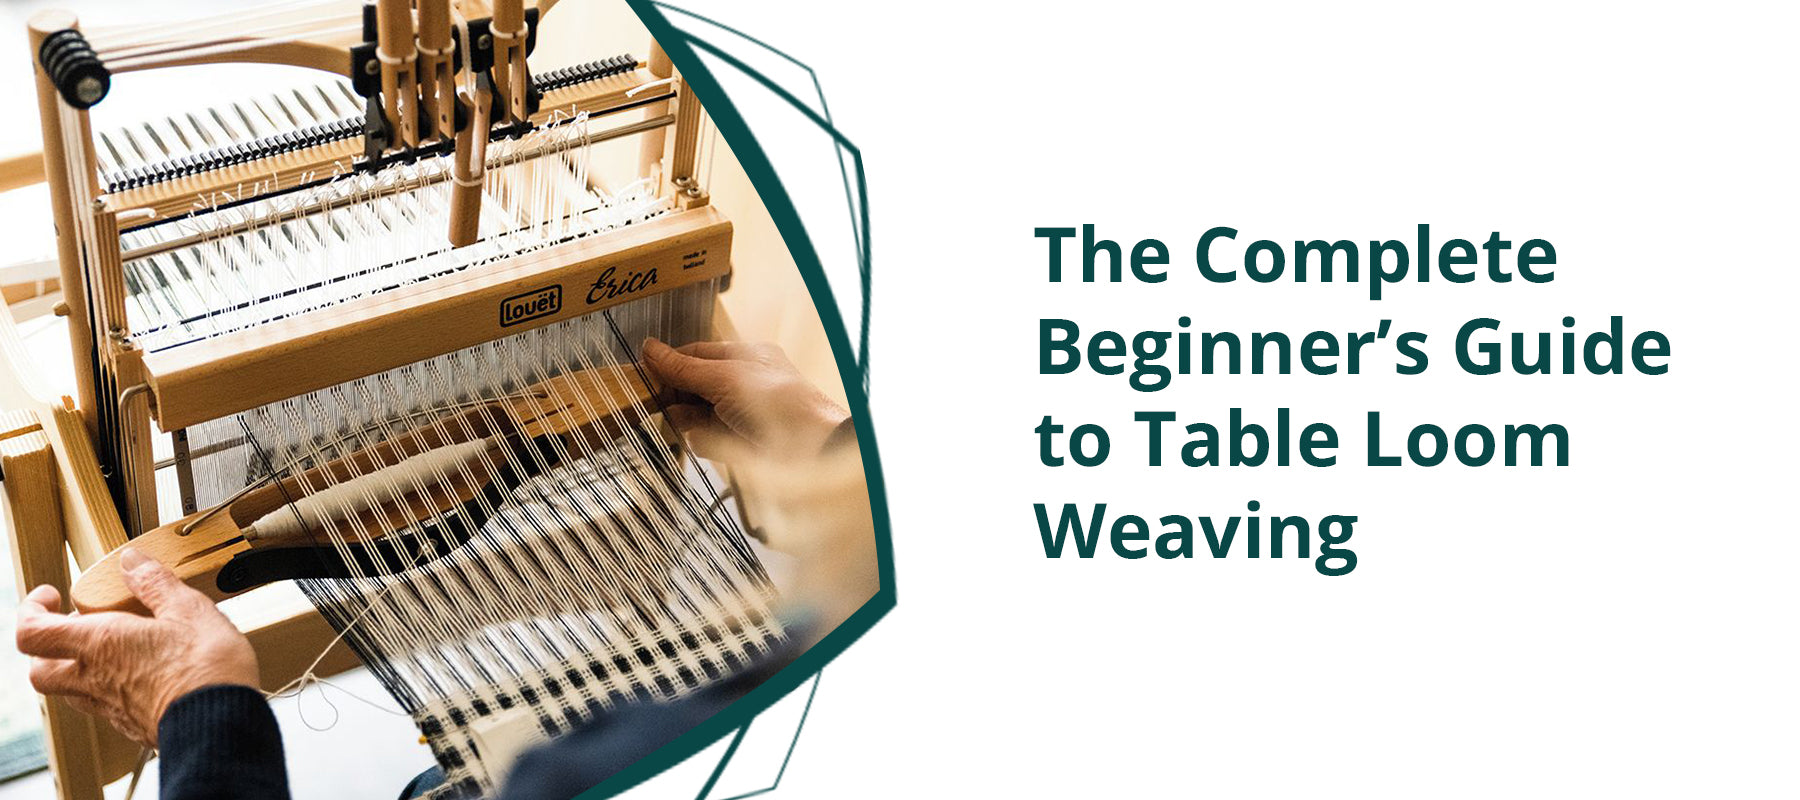 How to Start Weaving on a Table Loom: The Complete Beginner's Guide